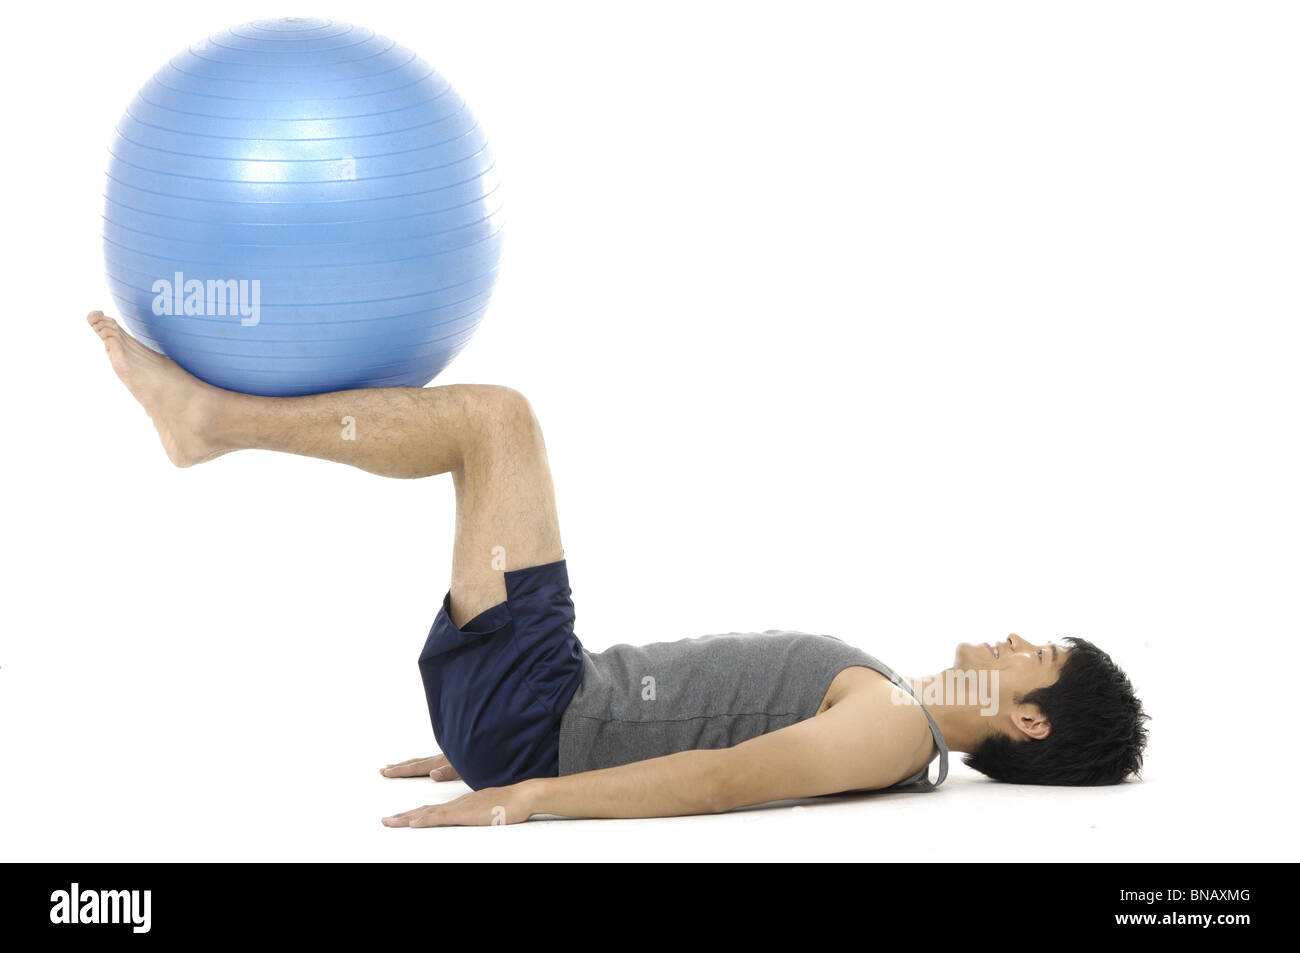 Side profile of a young man exercising with a fitness ball Stock Photo